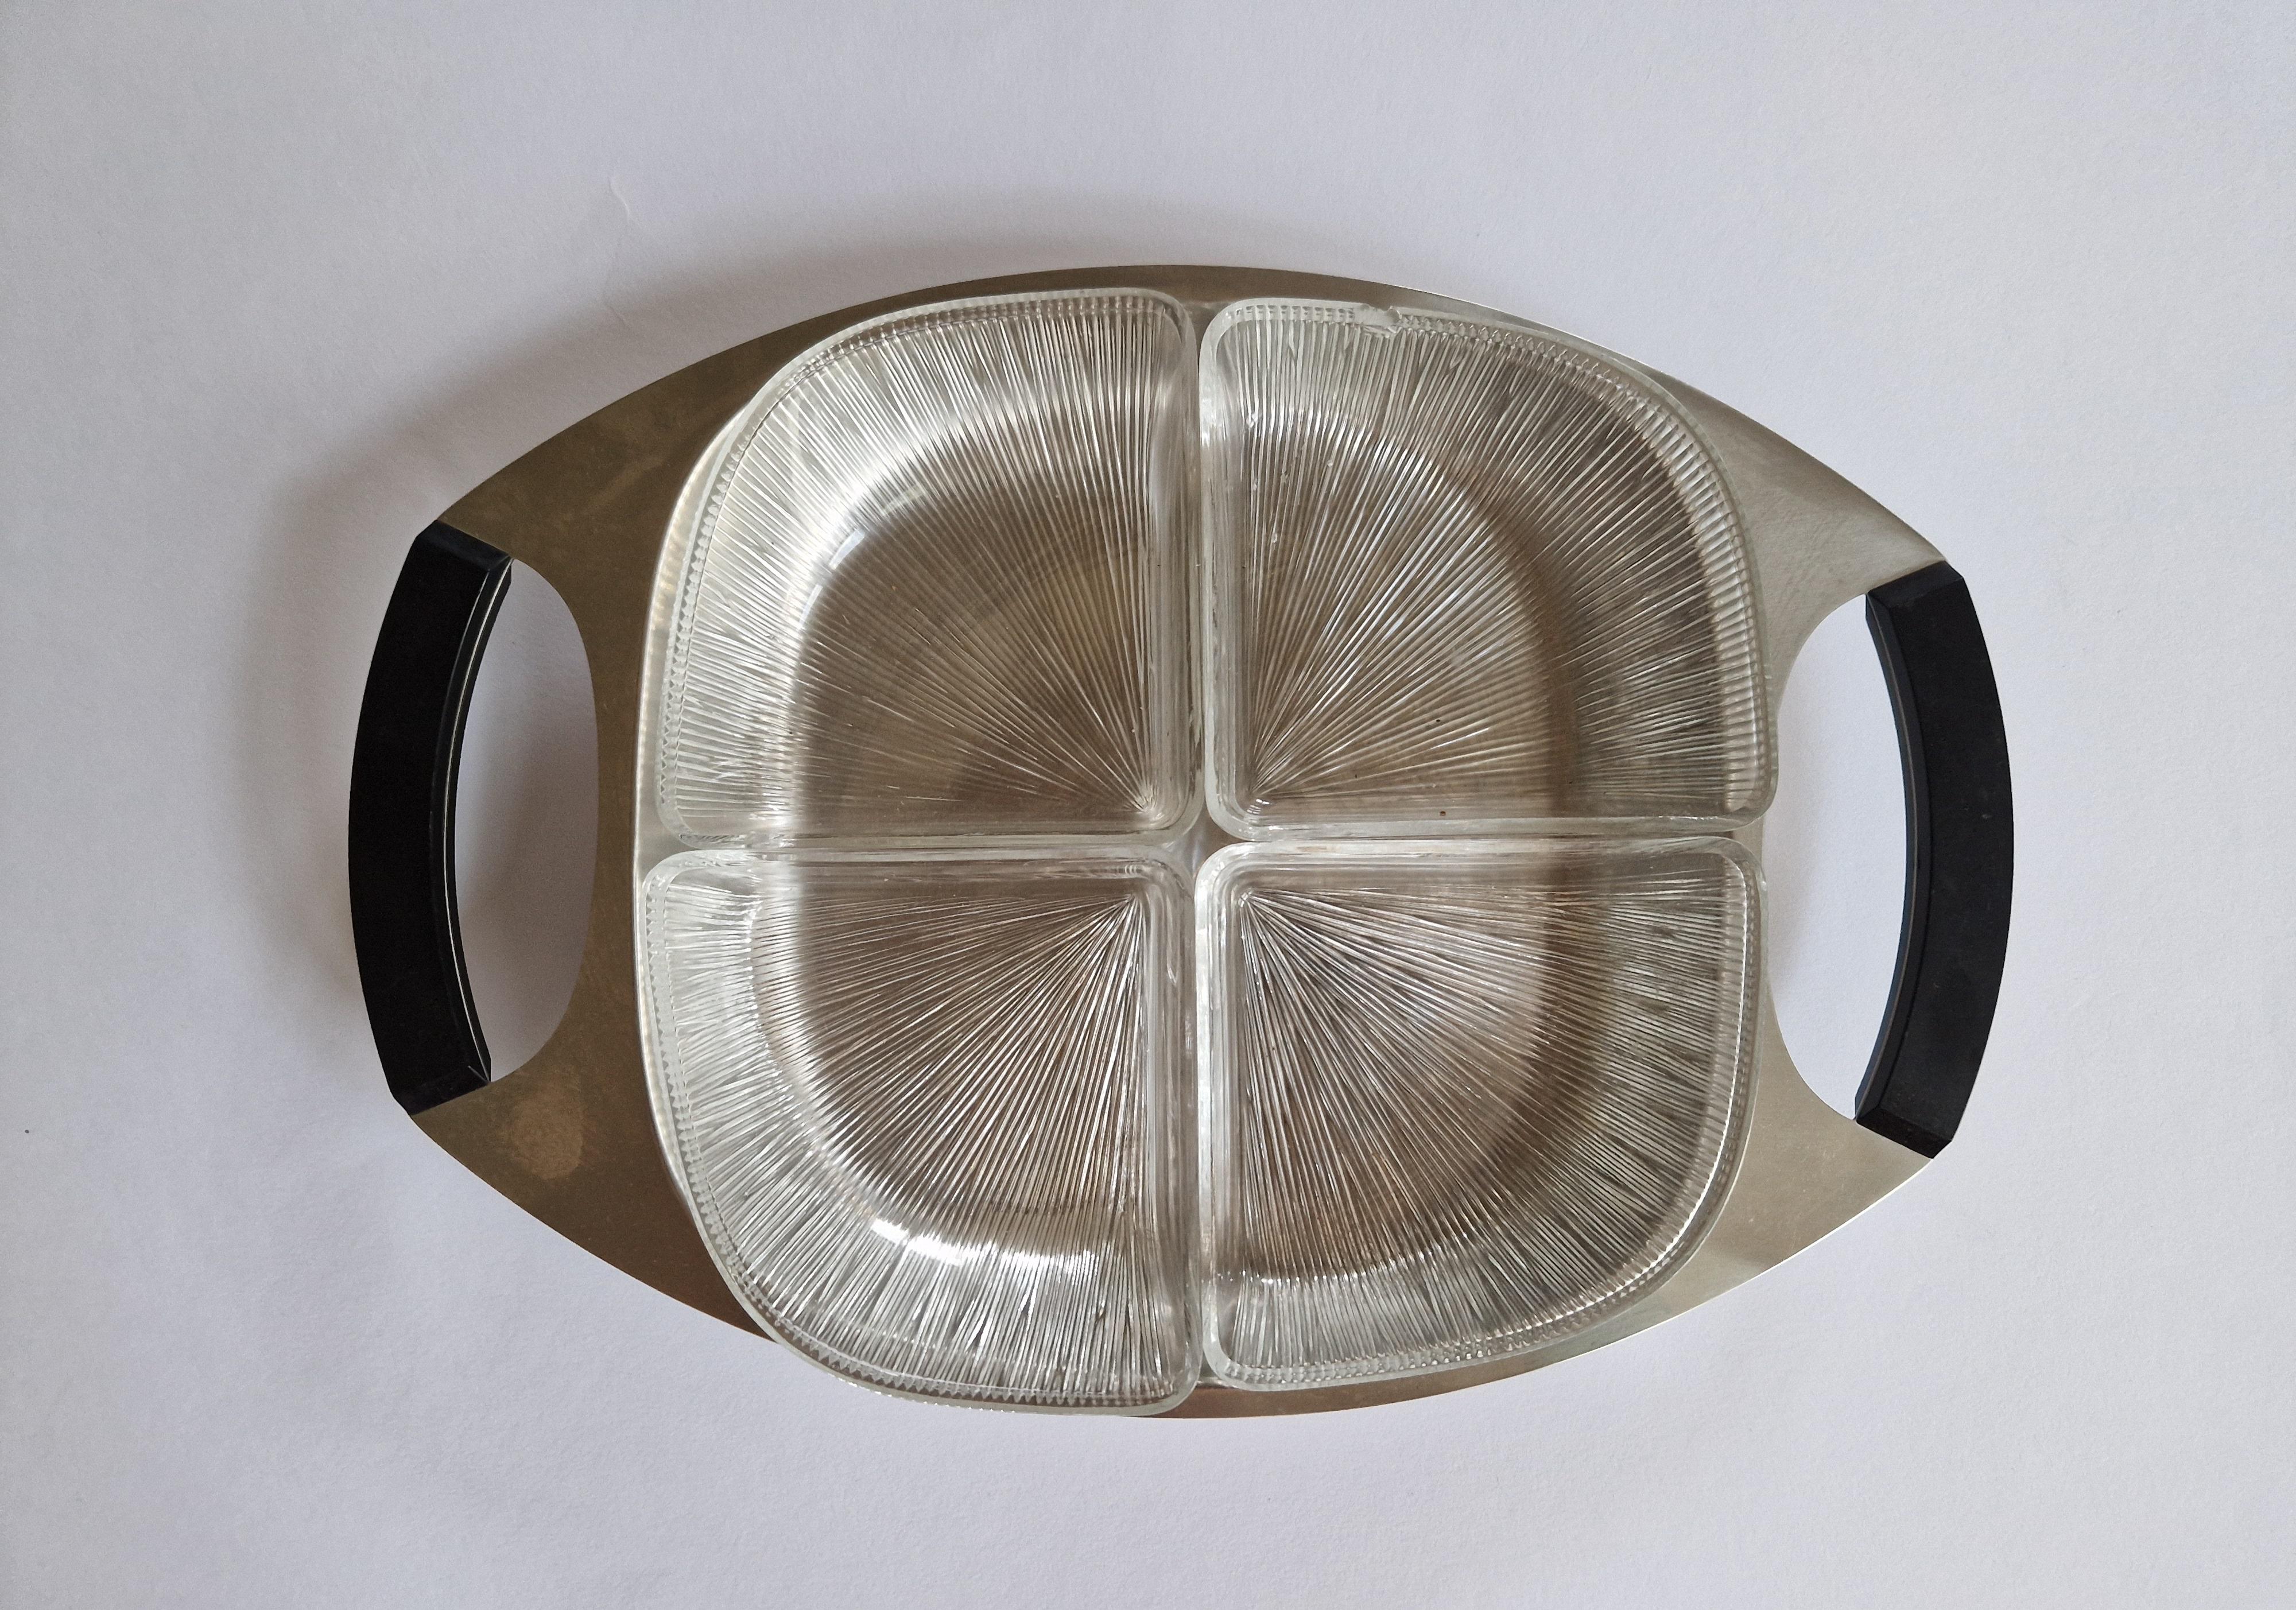 Mid-Century Modern Midcentury Serving Plate Stainless Steel and Glass Cromargan, Germany, 1970s For Sale